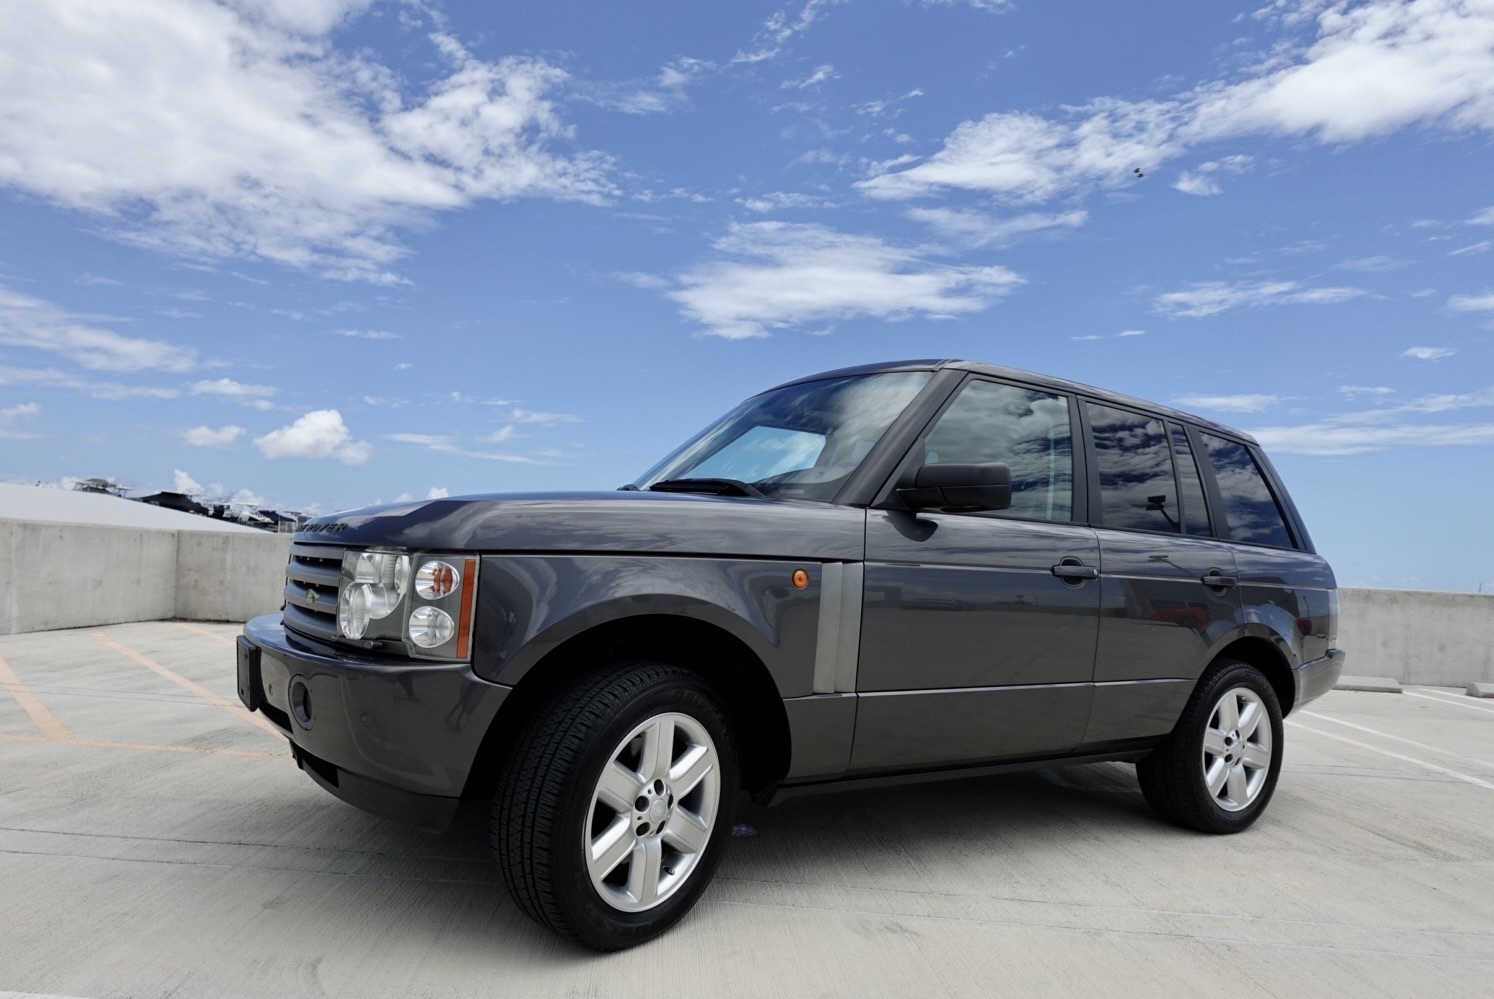 2005 Land Rover L322 9